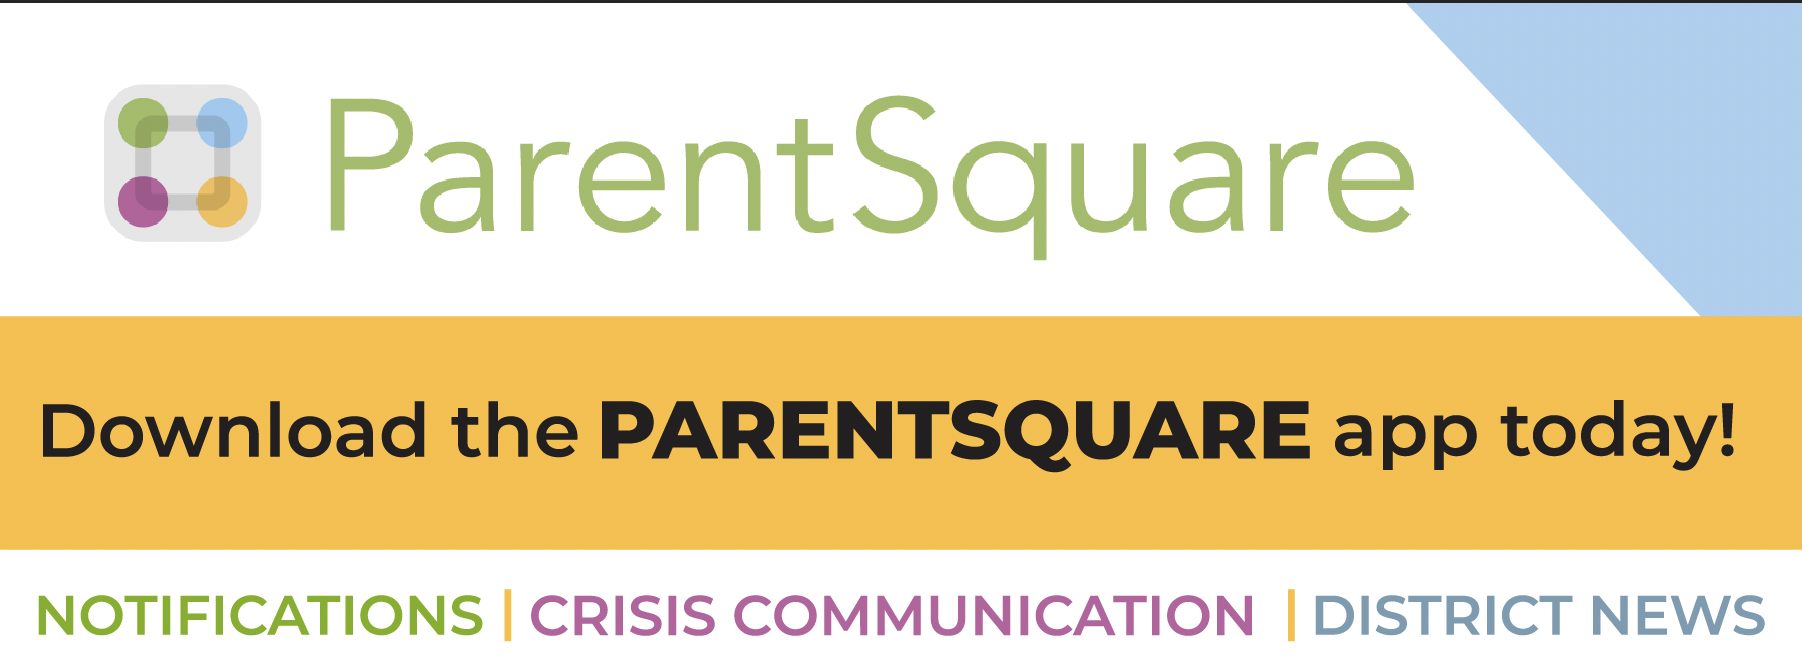 Download the PARENTSQUARE app today!